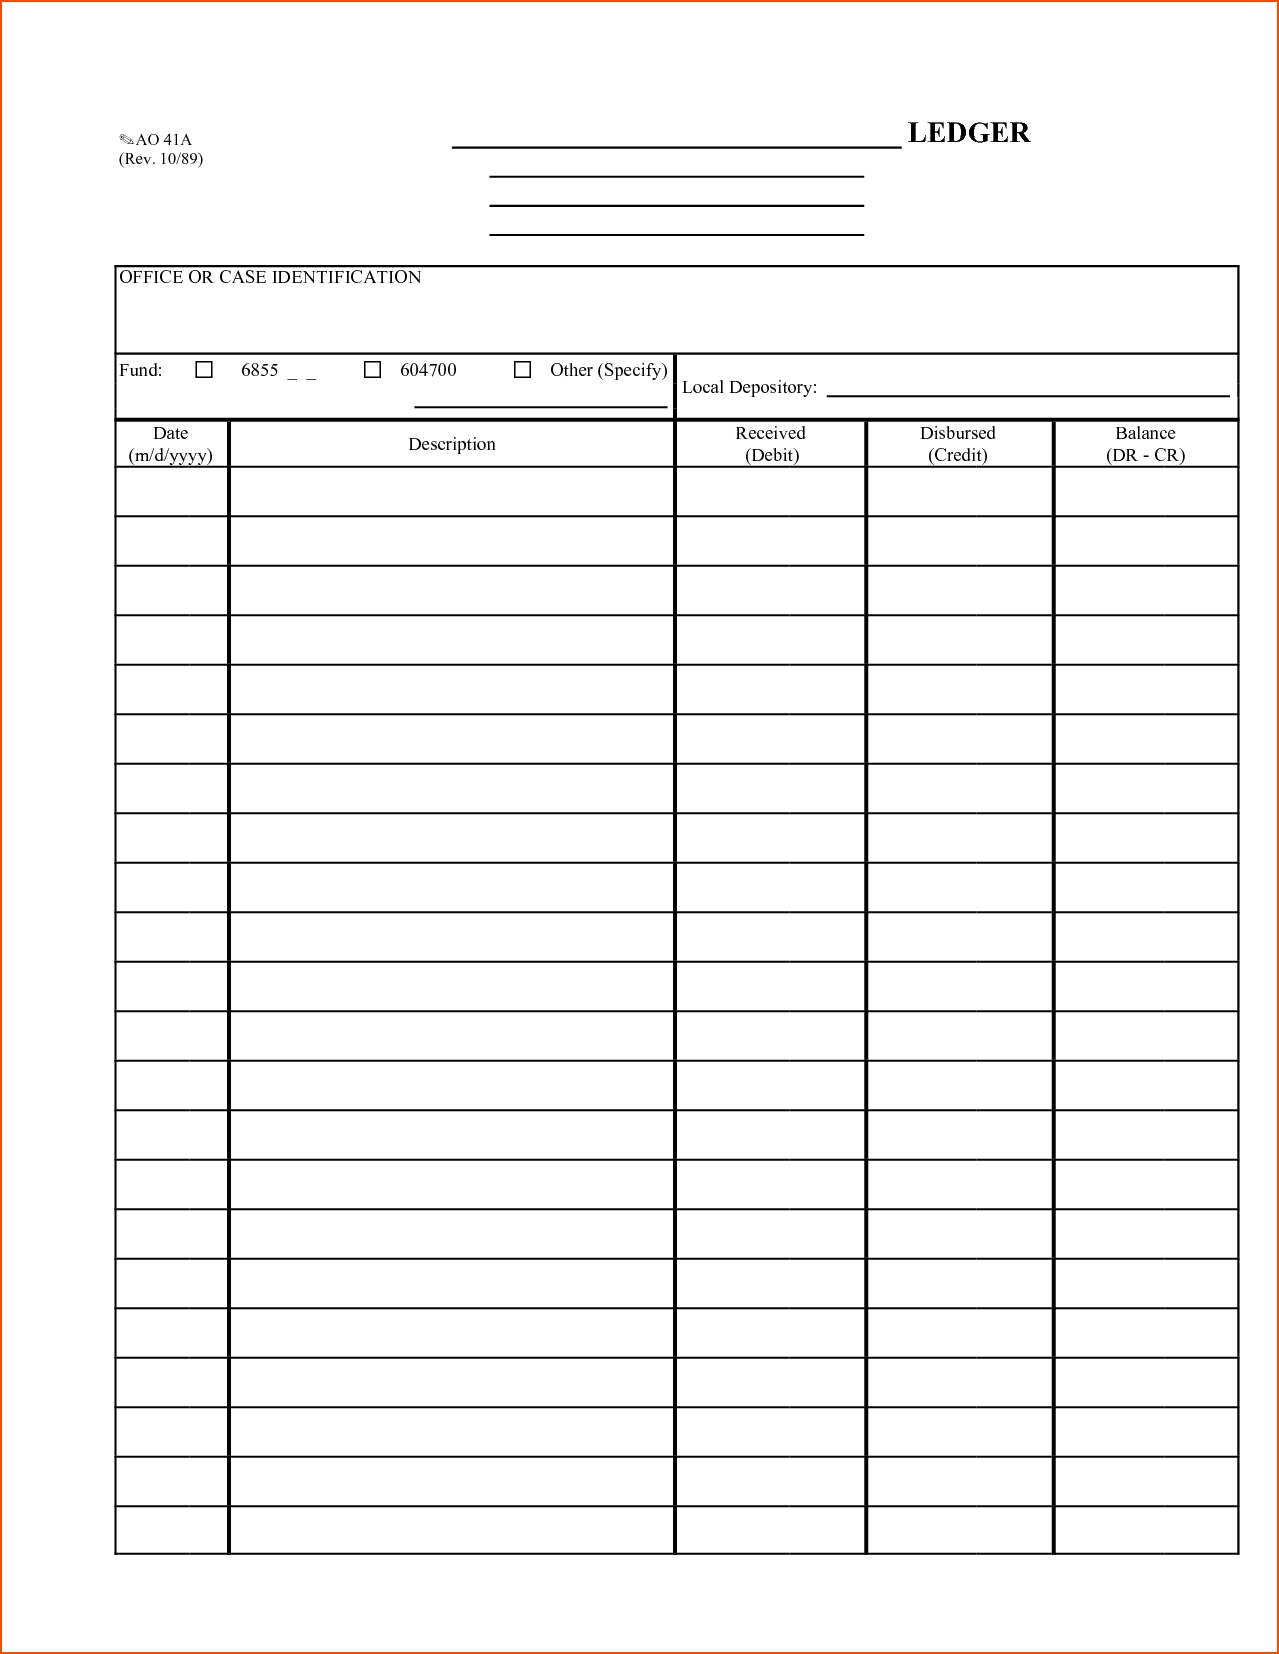 Accounting Ledger Book Template Free 9 - Down Town Ken More Inside Accounting Ledger Book Template Free